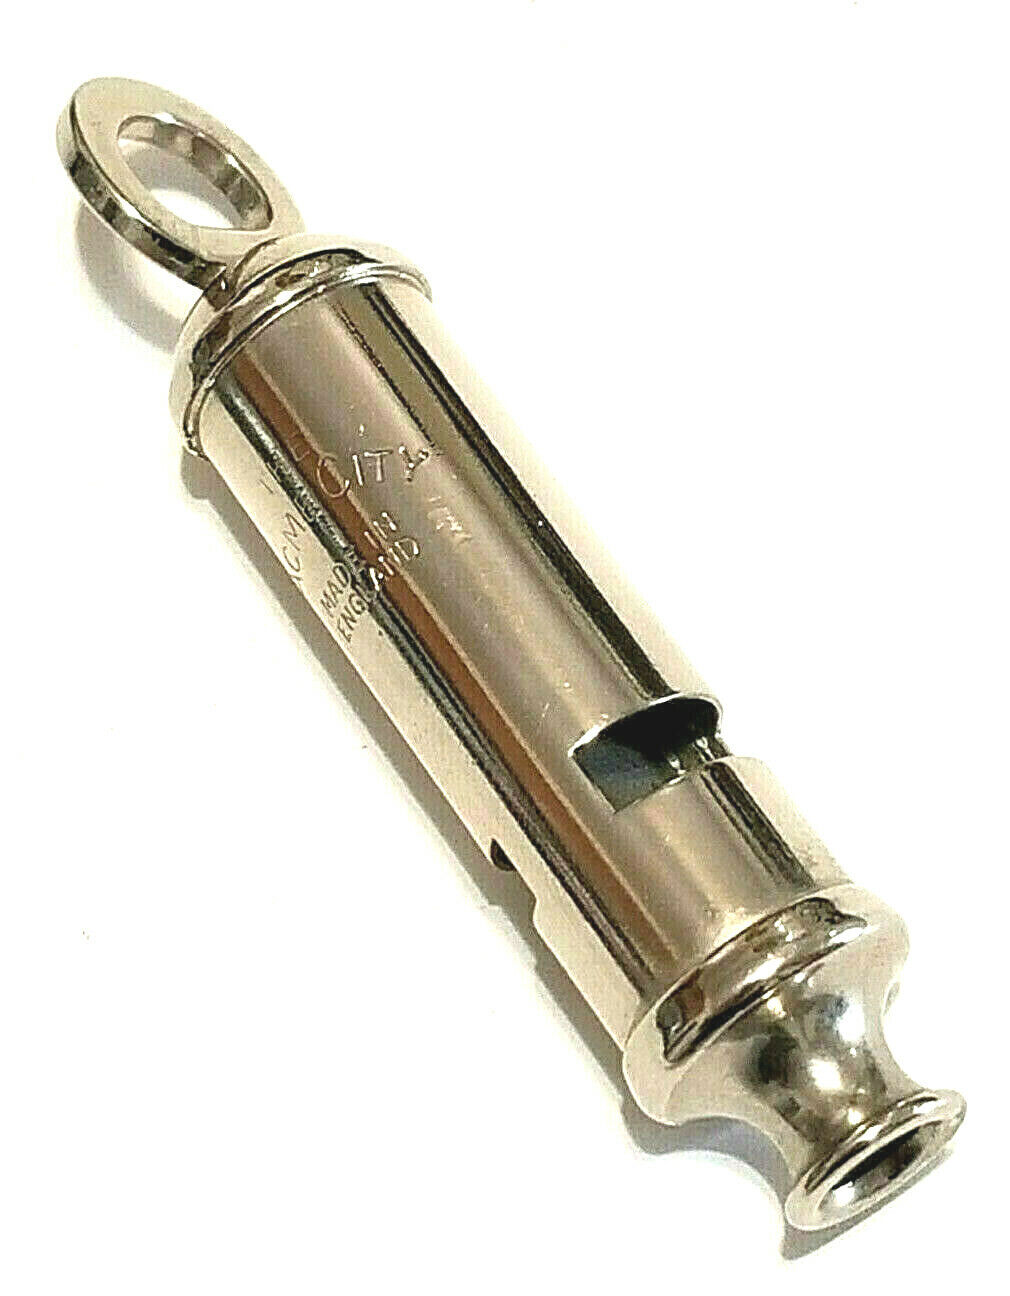 ACME City Trademark England Nickel-Plated Brass British Police Bobby Whistle NOS